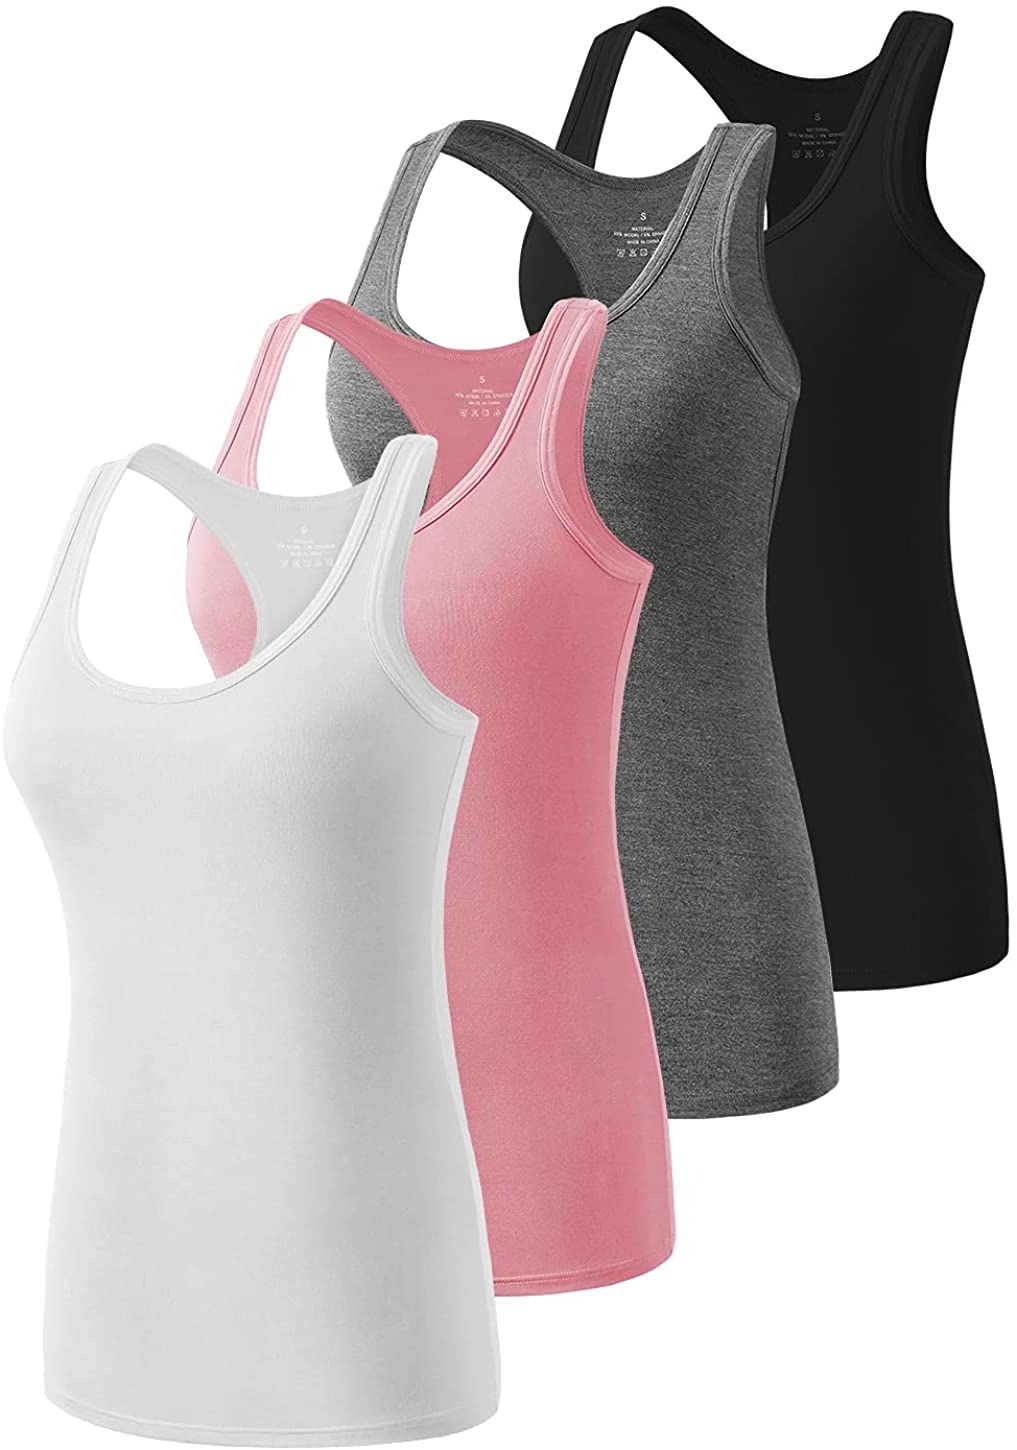 Gym Outfit - Bangladesh Factory, Suppliers, Manufacturers